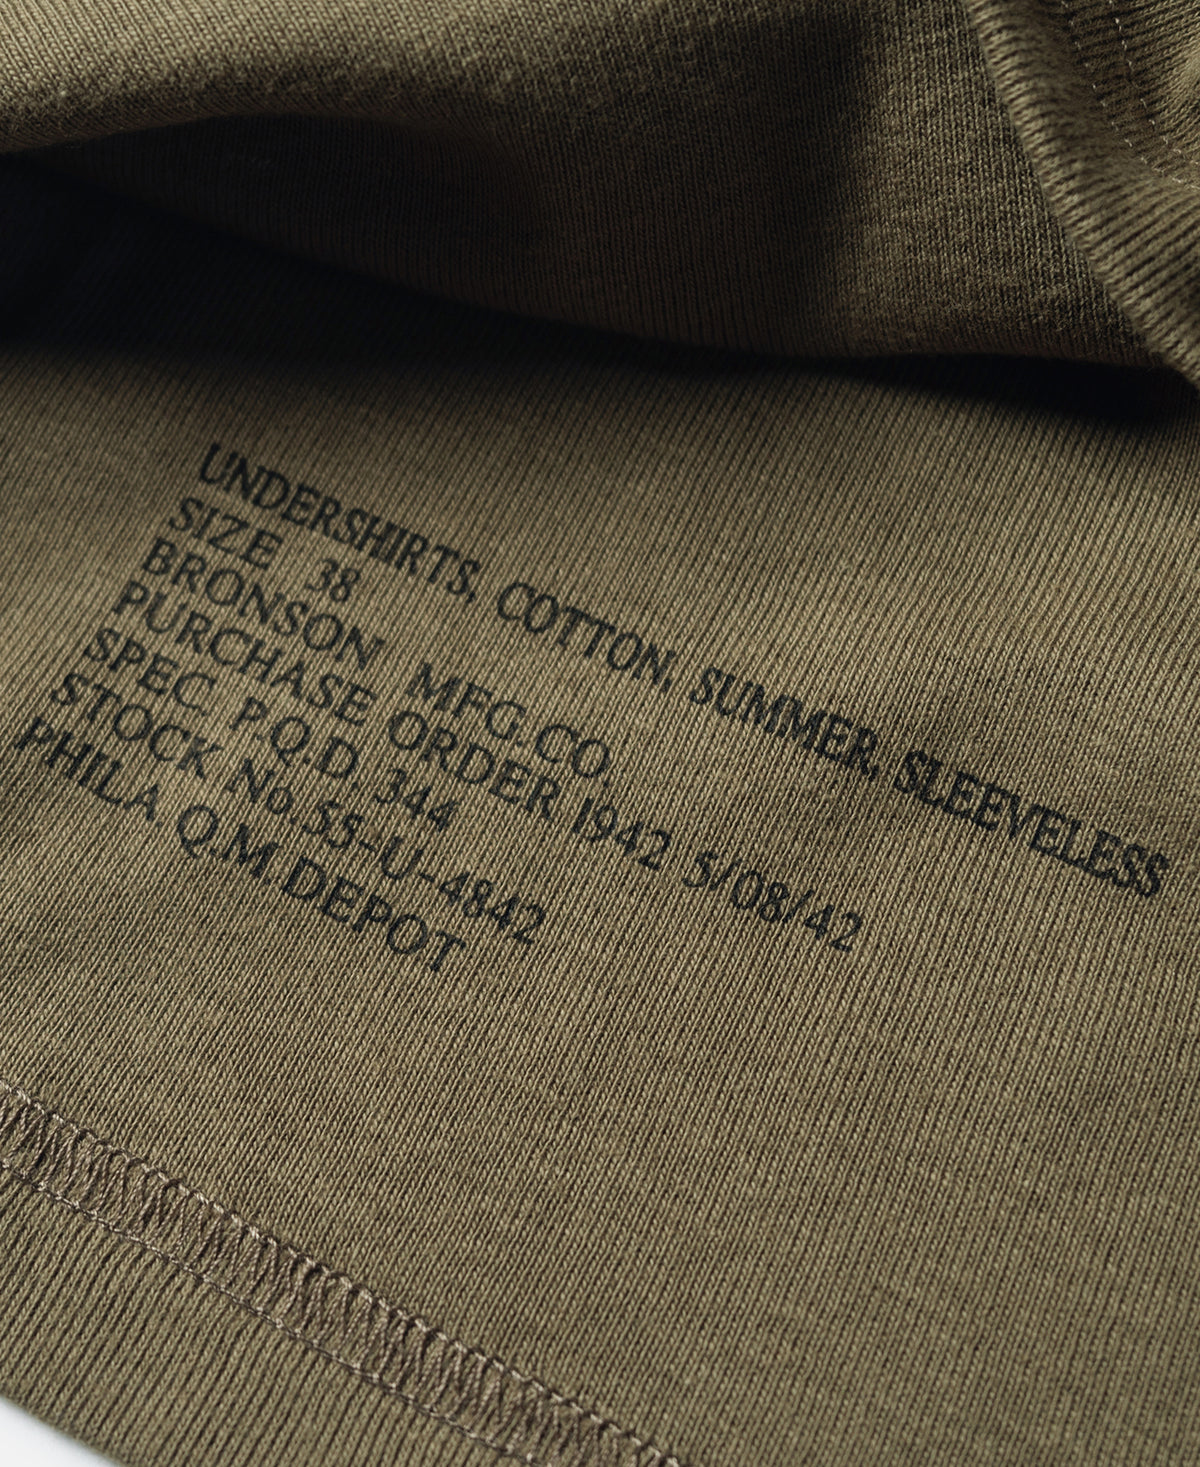 Military Cotton Tank Top - Olive